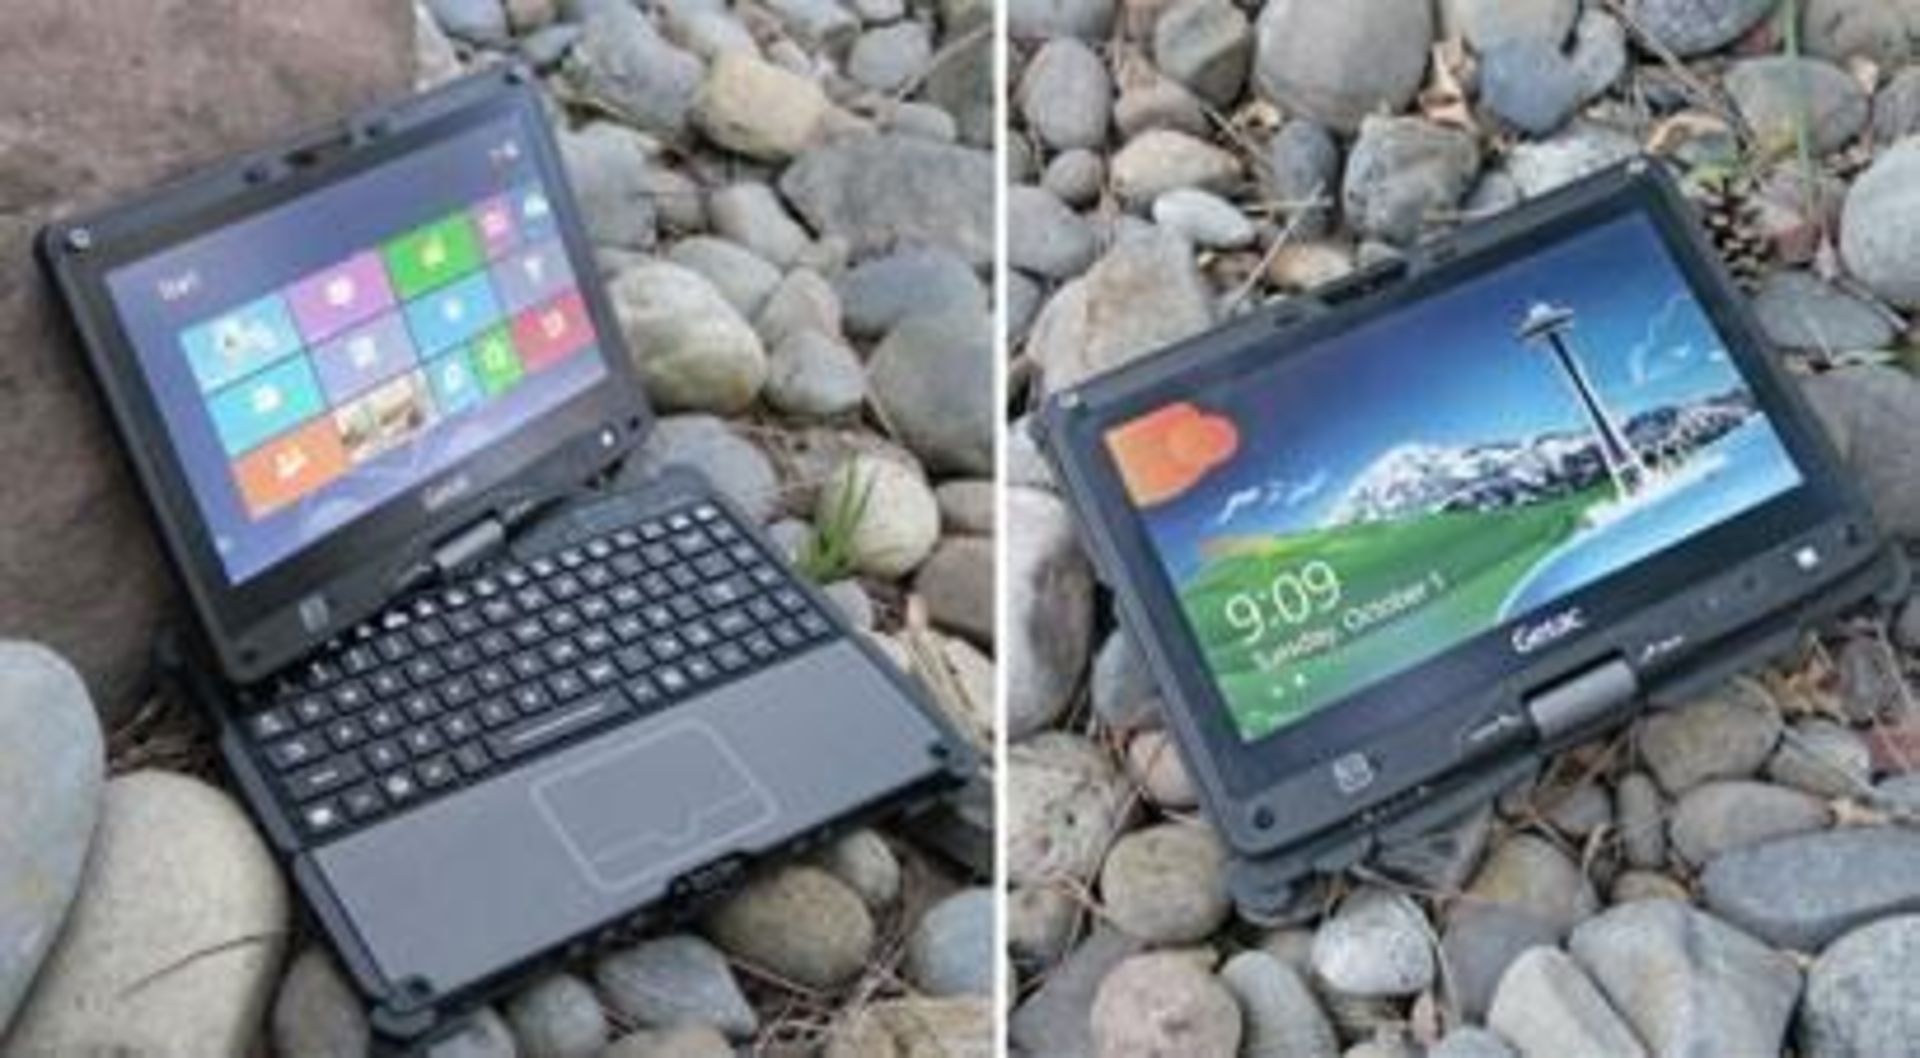 1 x Getac V200 Rugged Laptop Computer - Rugged Laptop That Transforms into a Tablet PC - Features an - Bild 5 aus 7